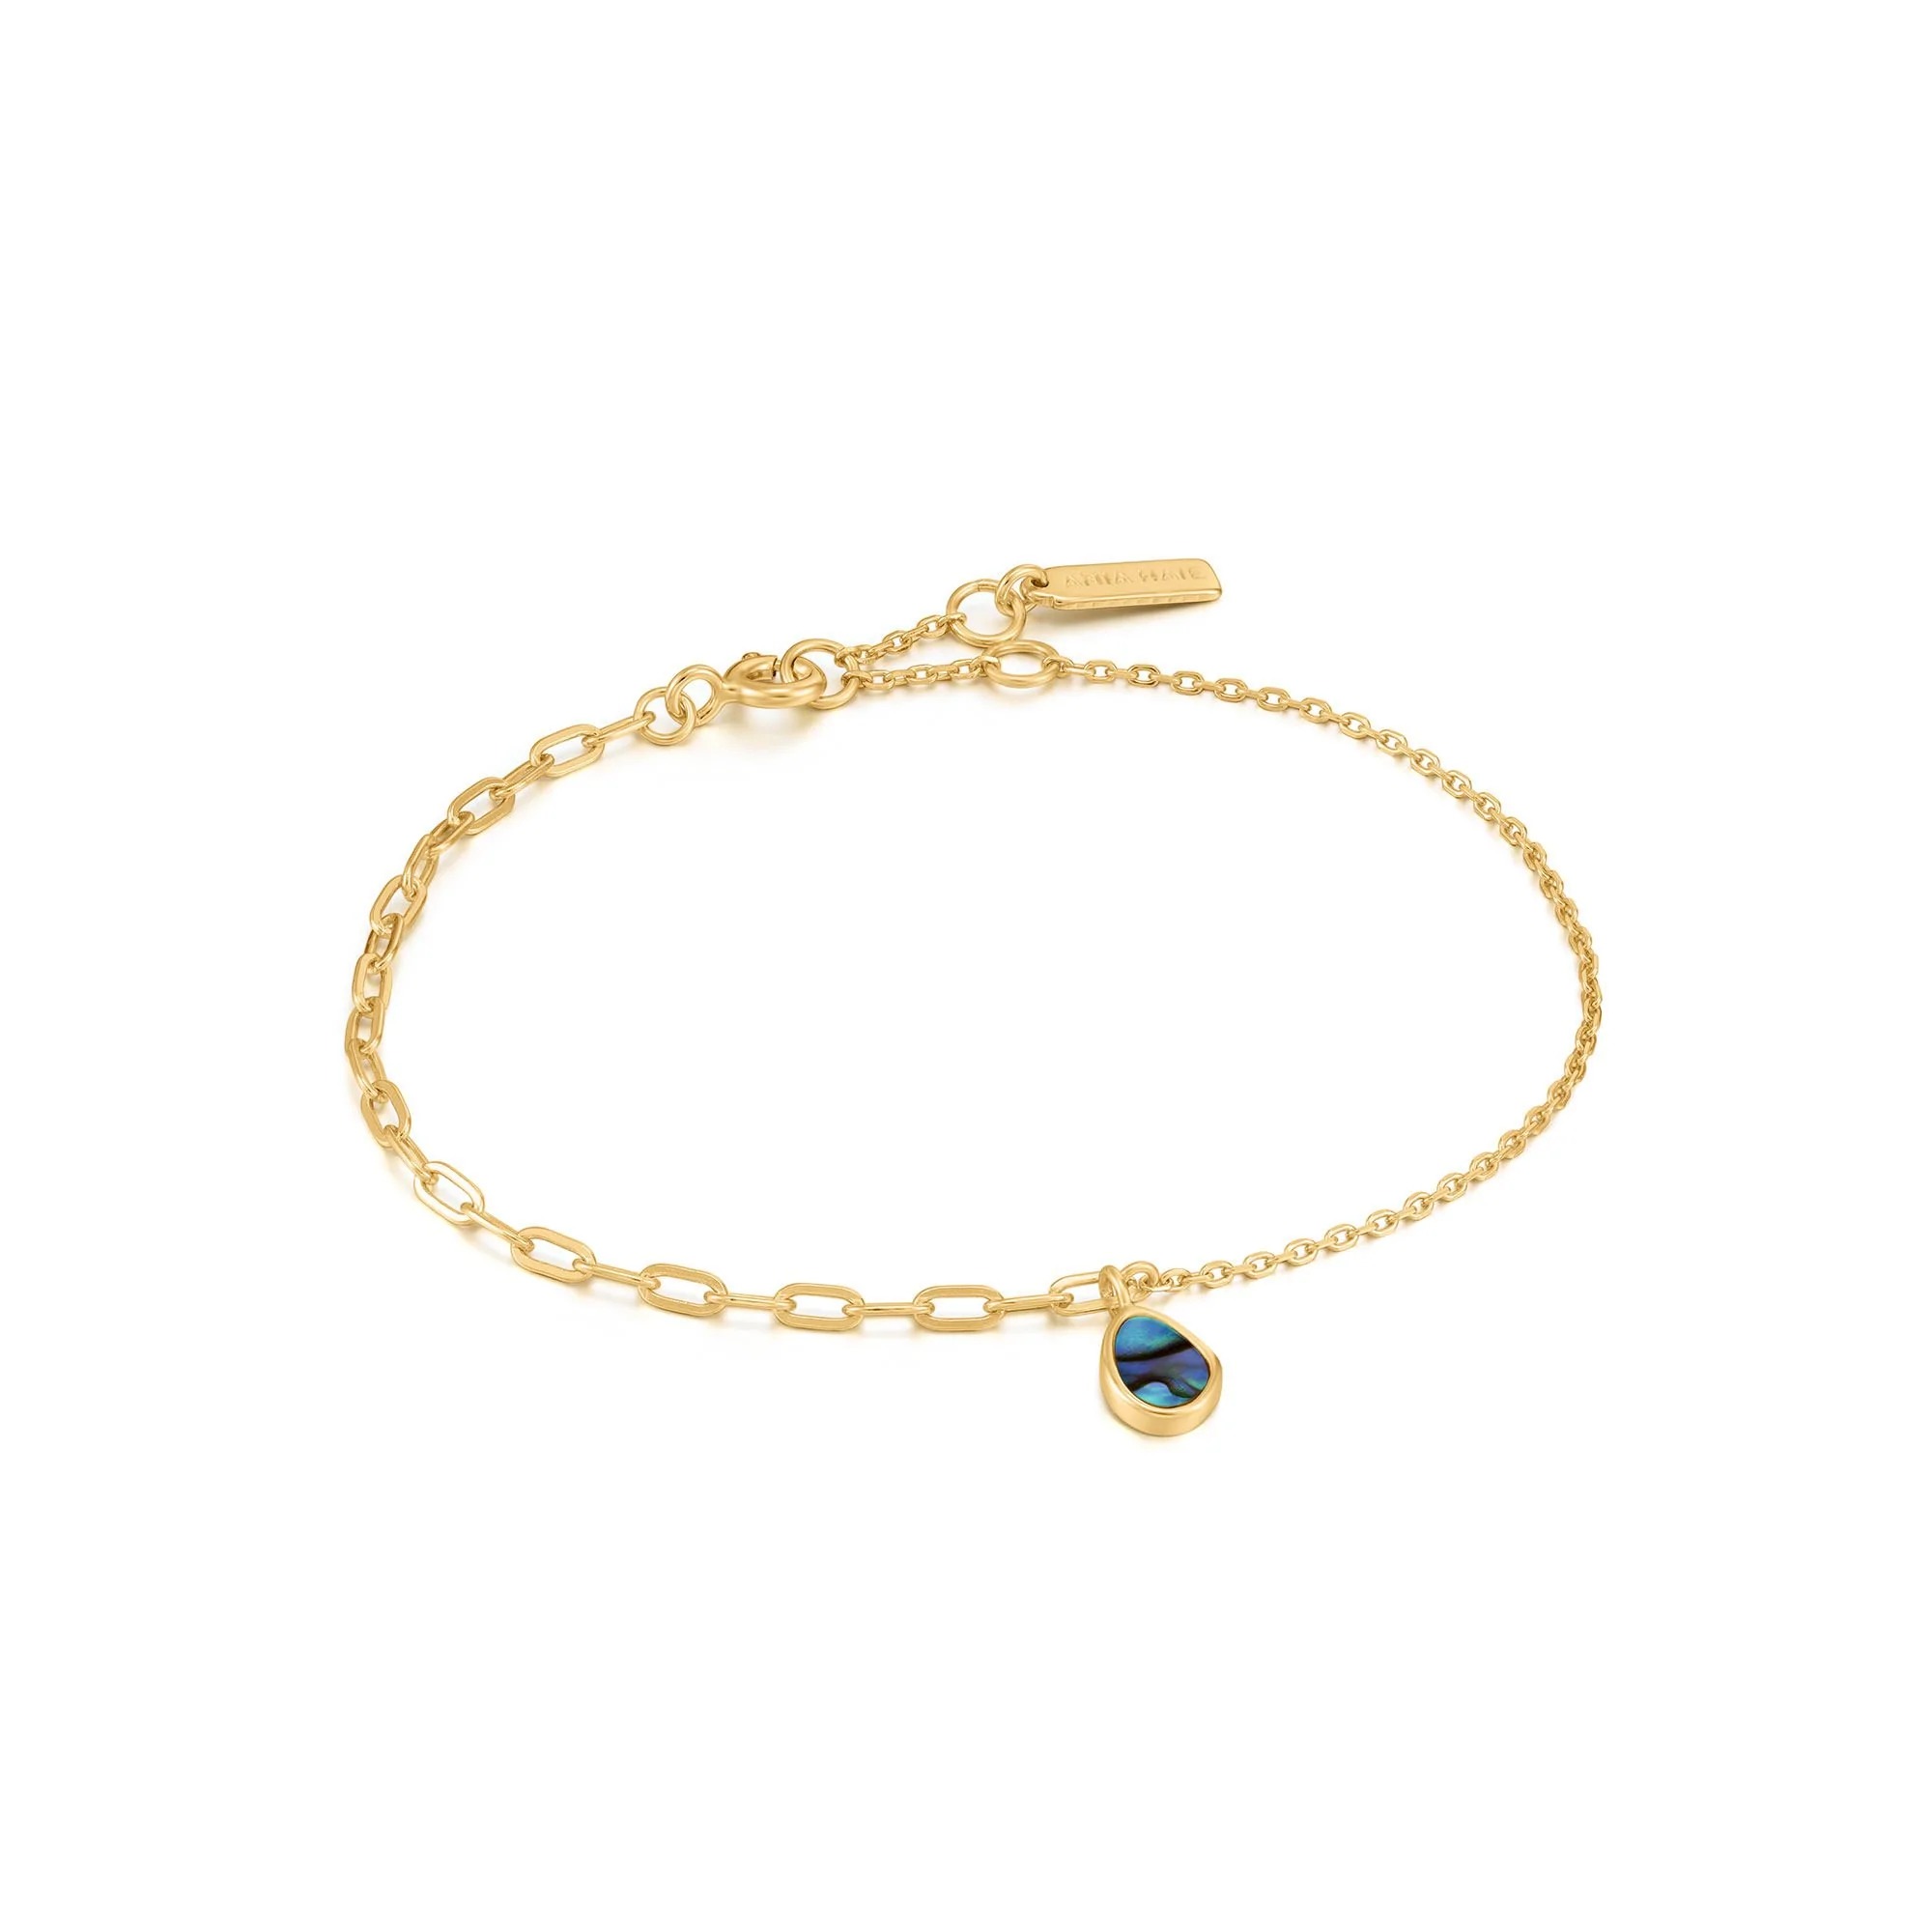 ANIA HAIE Tidal Abalone Mixed Link Bracelet, Gold-Plate